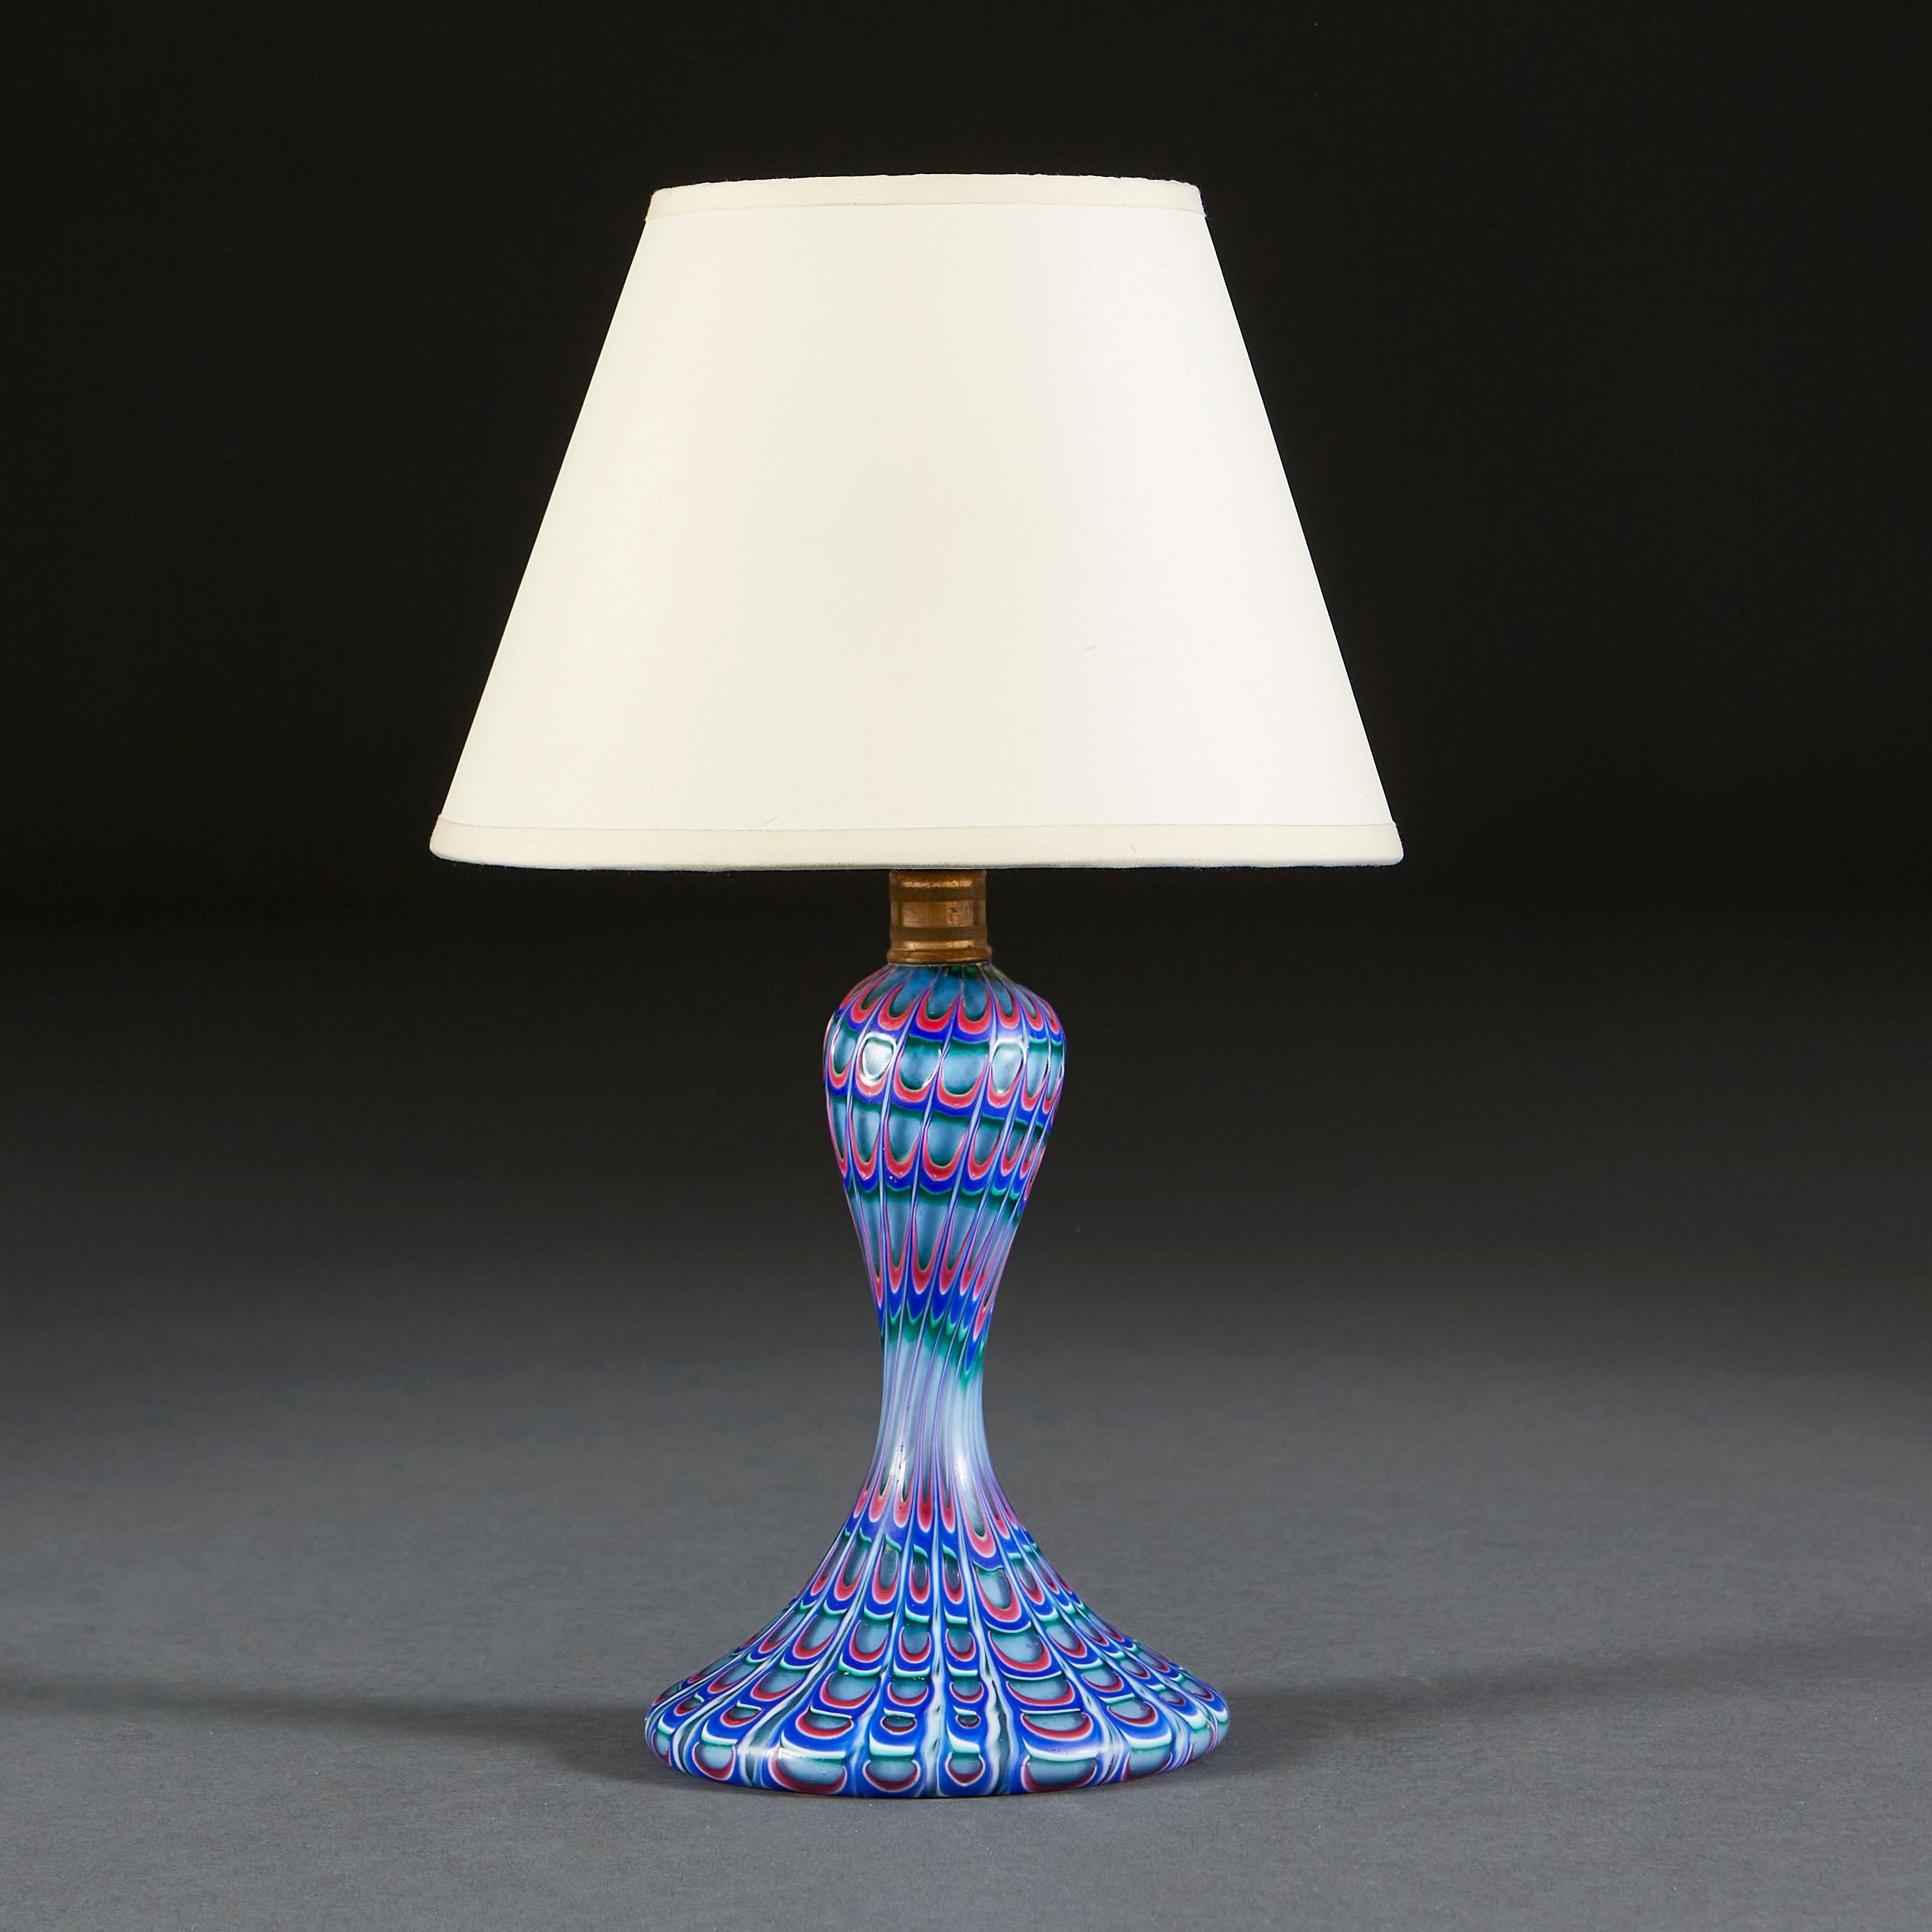 An unusual Murano glass lamp by Seguso, of small scale, with blue and pink drip swirl pattern to the surface imitating the feathers of a peacock.

Currently wired for the UK.

Please note: Lampshade not included.